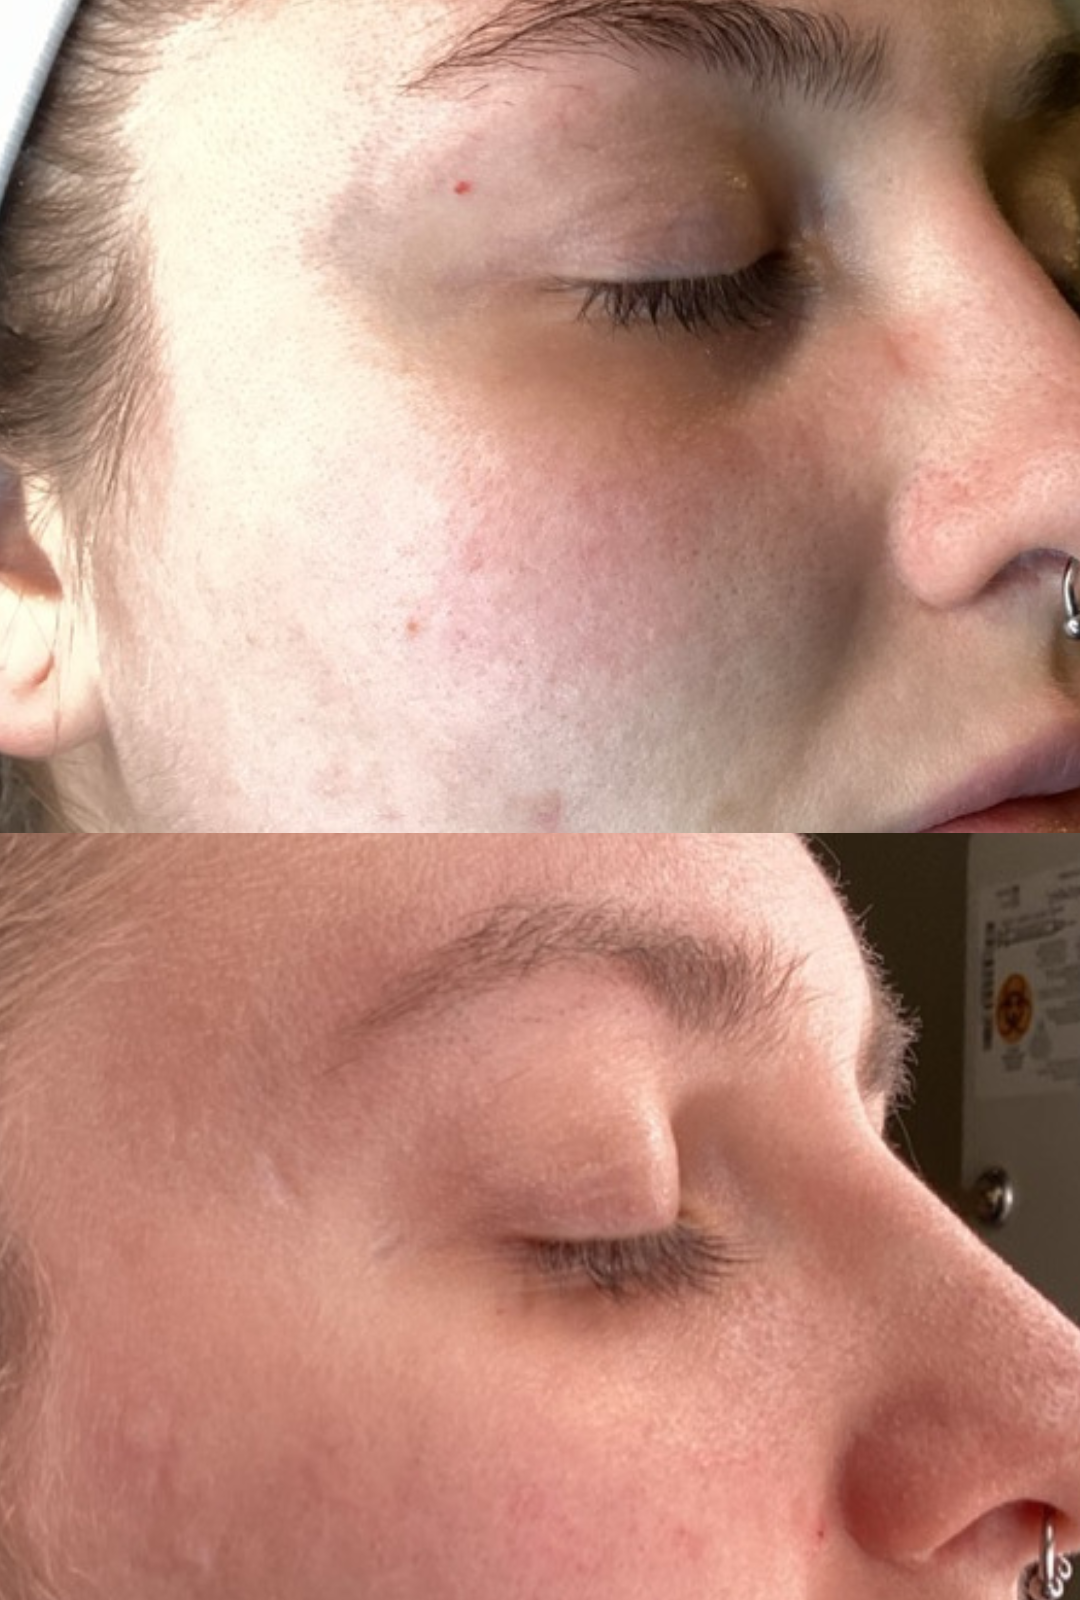 2 weeks post microneedling with daily PRX⁸ application